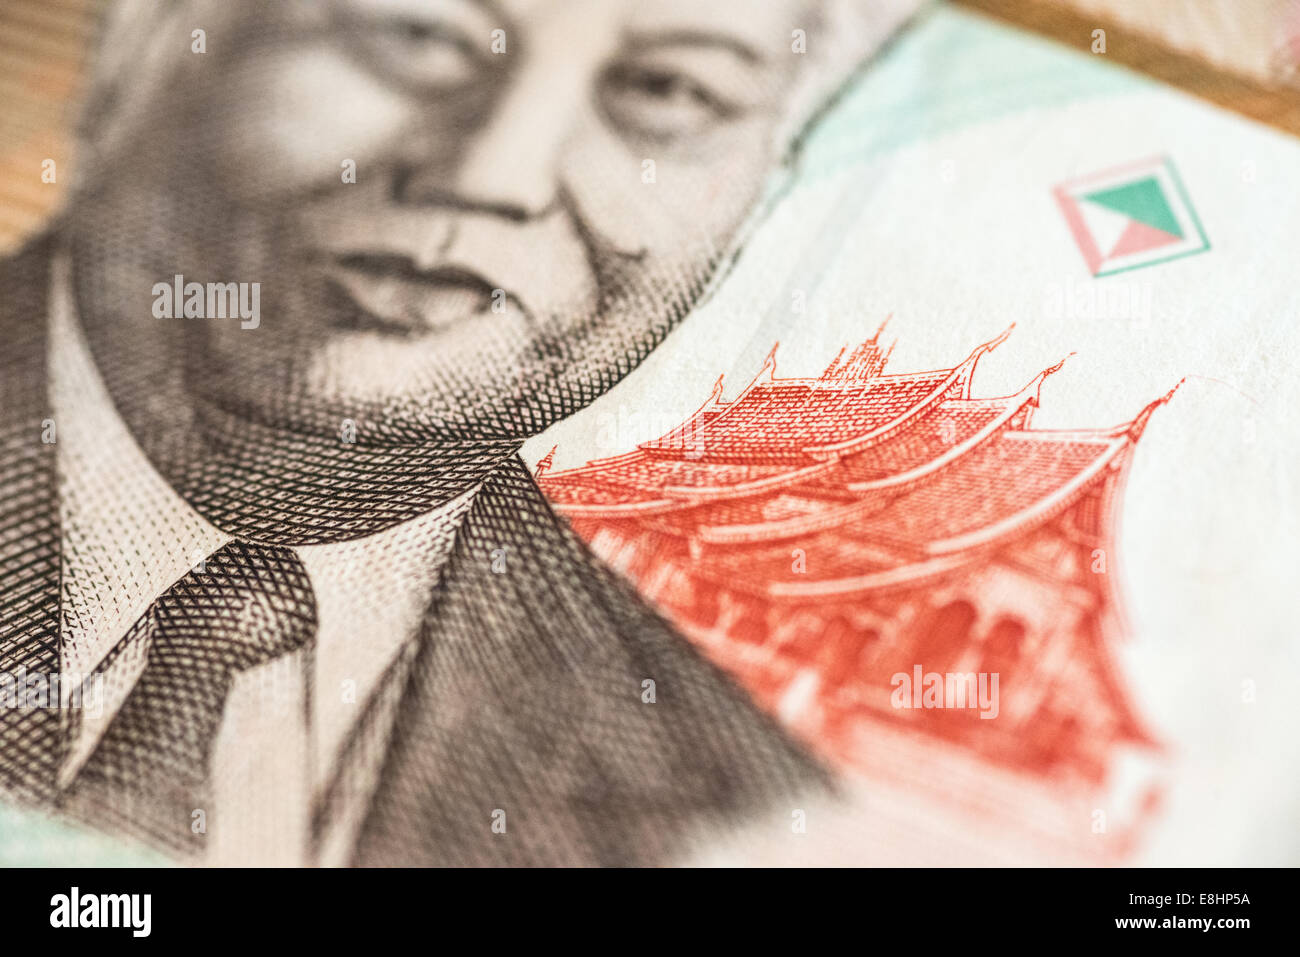 Close-up shots of the Lao paper currency, known as the kip. Stock Photo